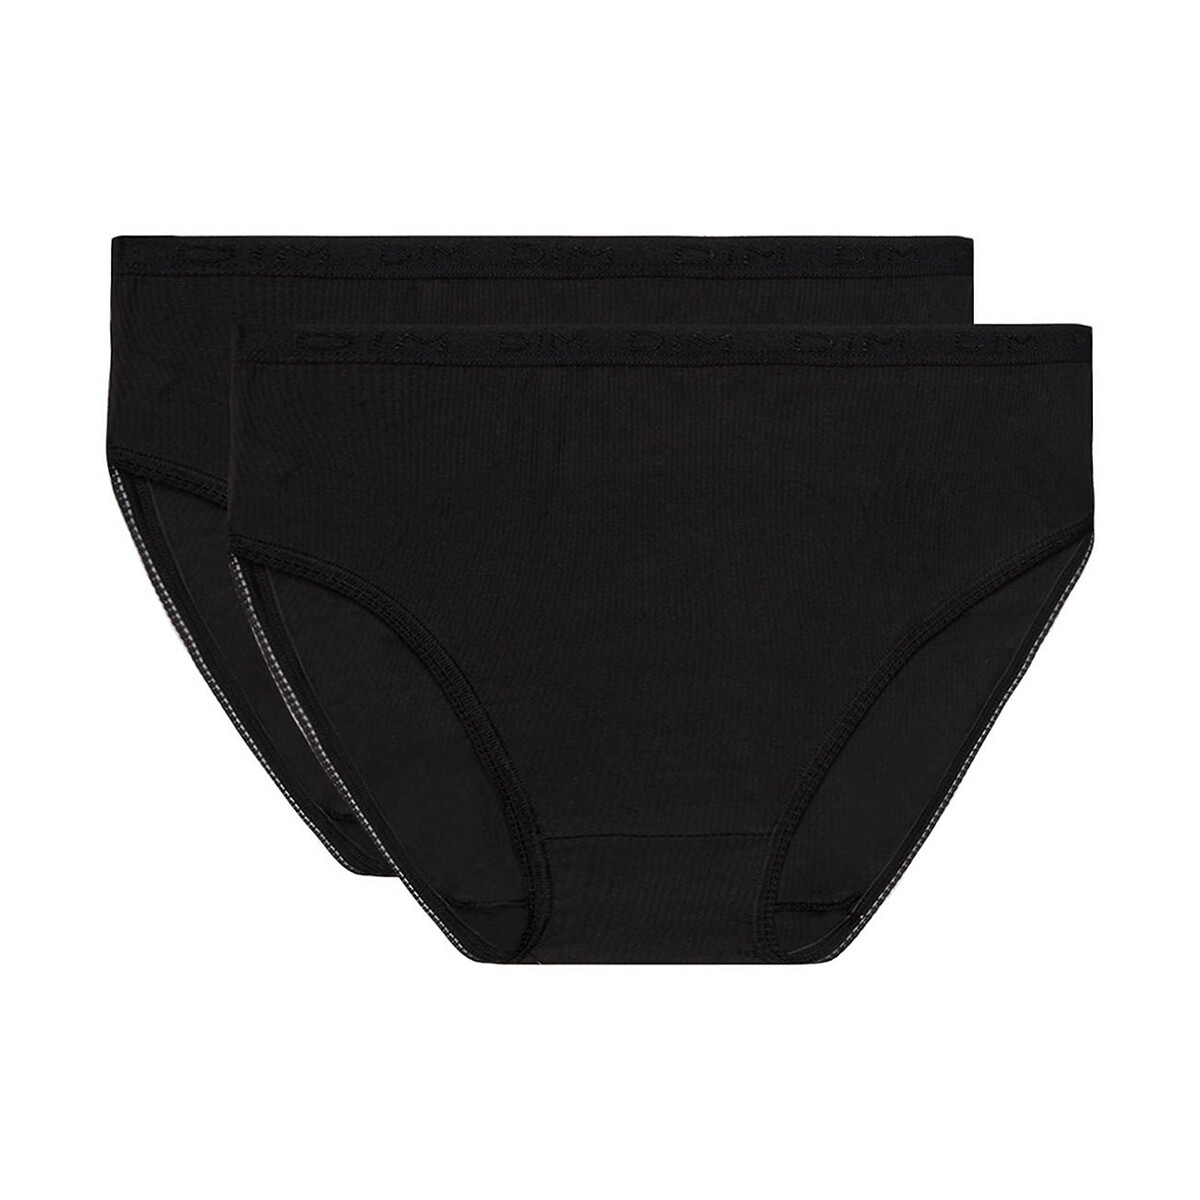 Pack of 2 Full Knickers in Cotton